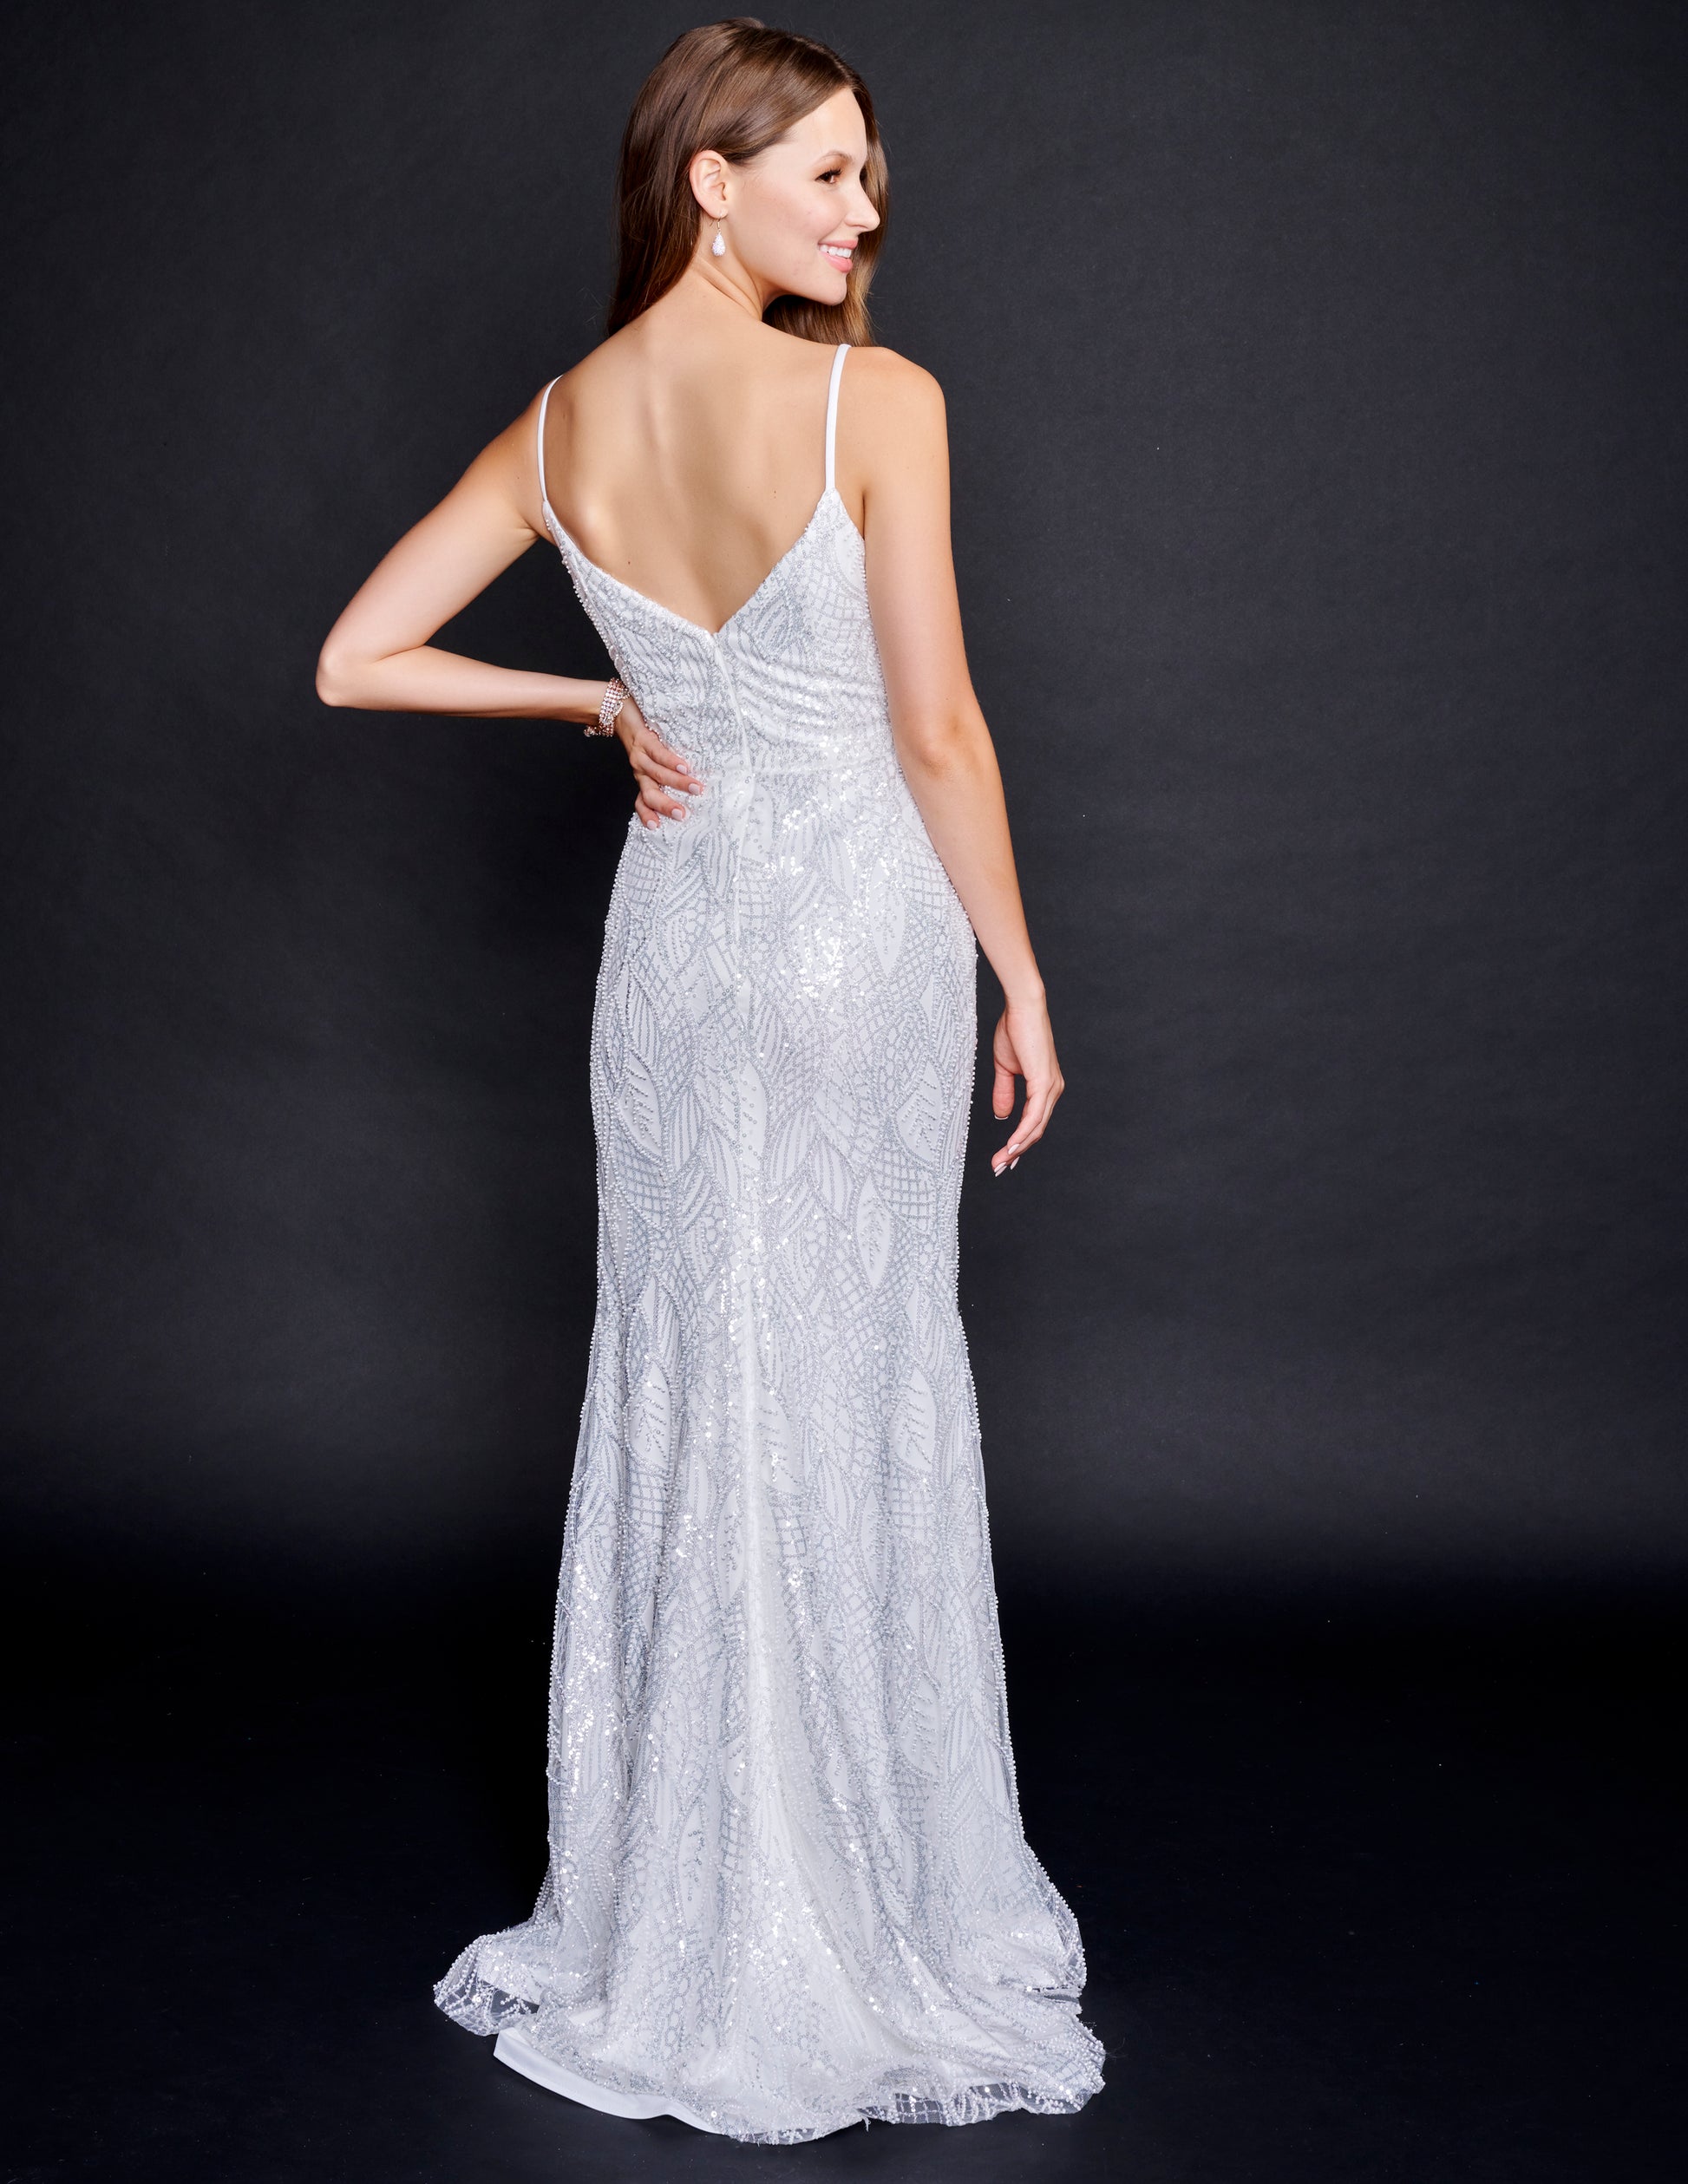 Nina Canacci 2346 Ivory Wedding Dress Pearl Embellished Fitted Plunging Neckline  Color:  Ivory